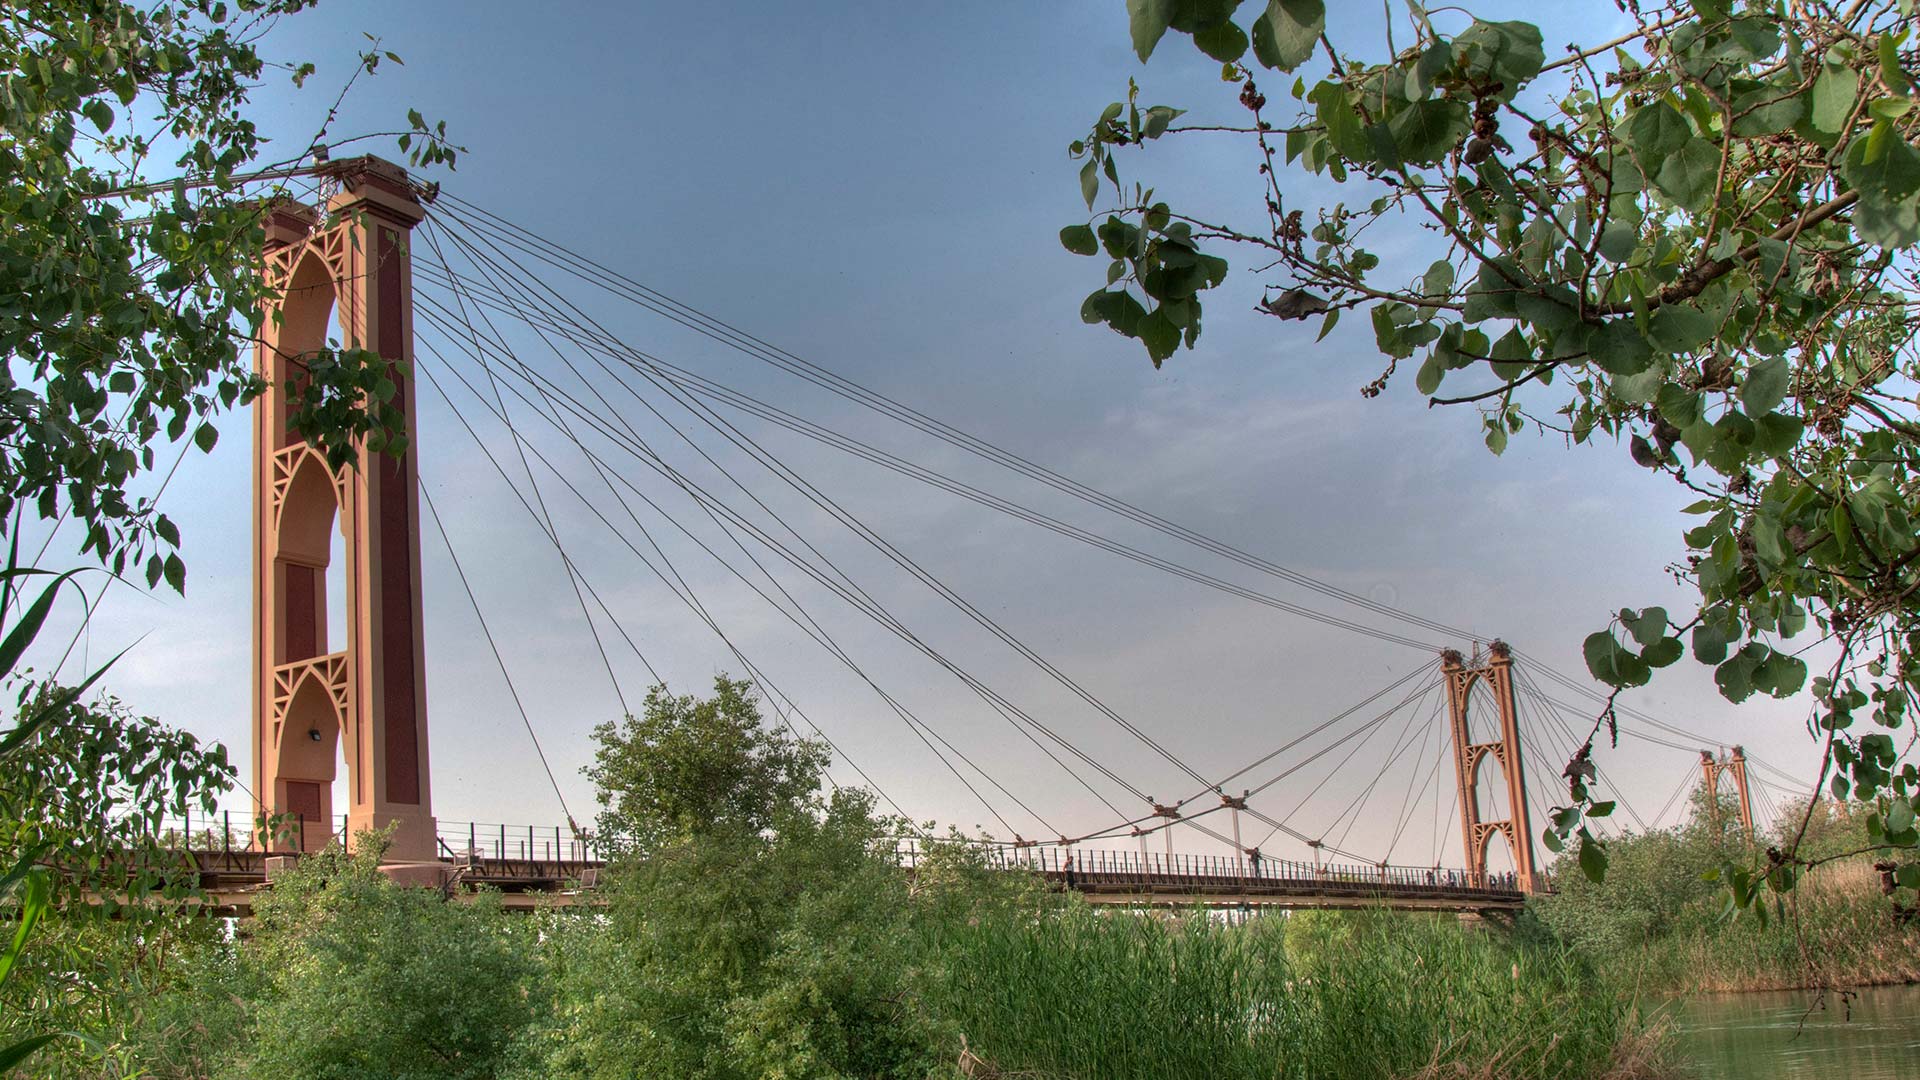 A panoramic photograph captures the iconic pedestrian suspension bridge of Deir EzZor, serving as a symbol of the city, and a testament to architectural ingenuity and urban connectivity.